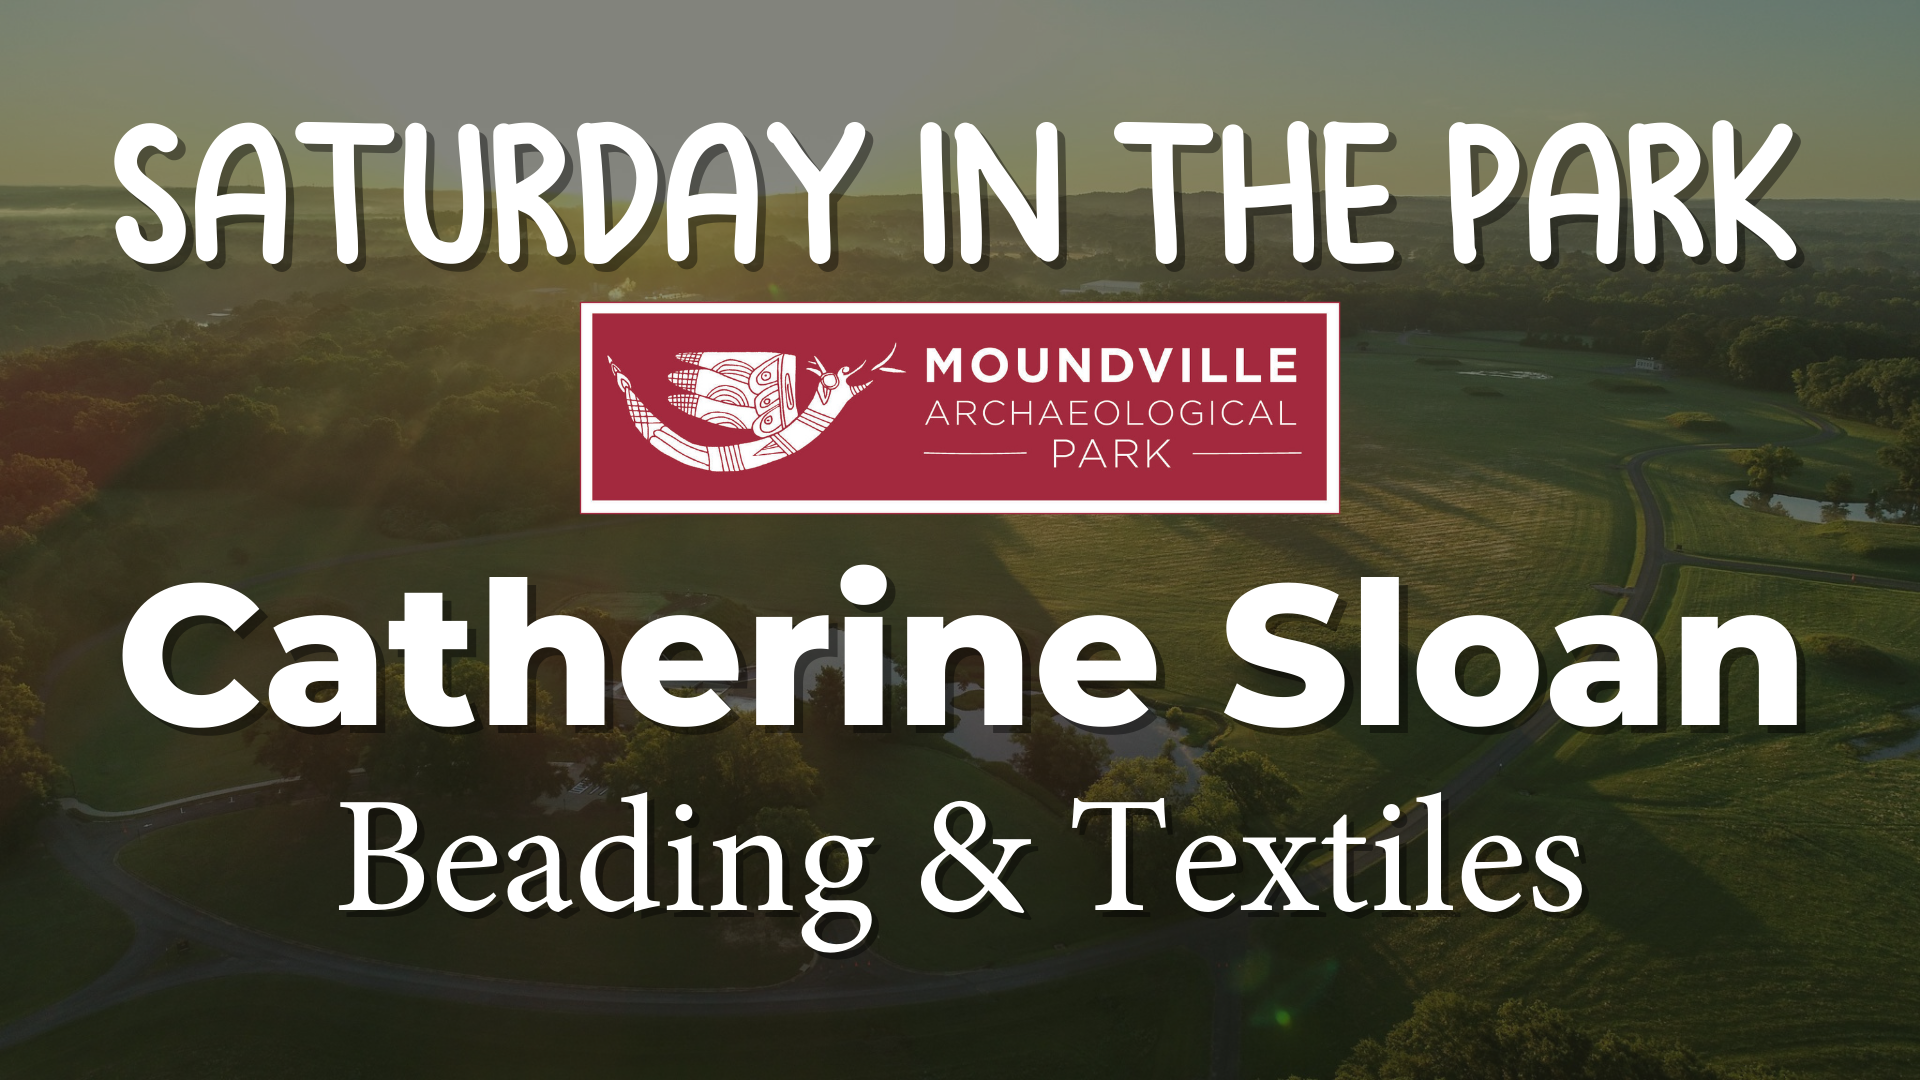 Saturday in the Park: Beading & Textiles